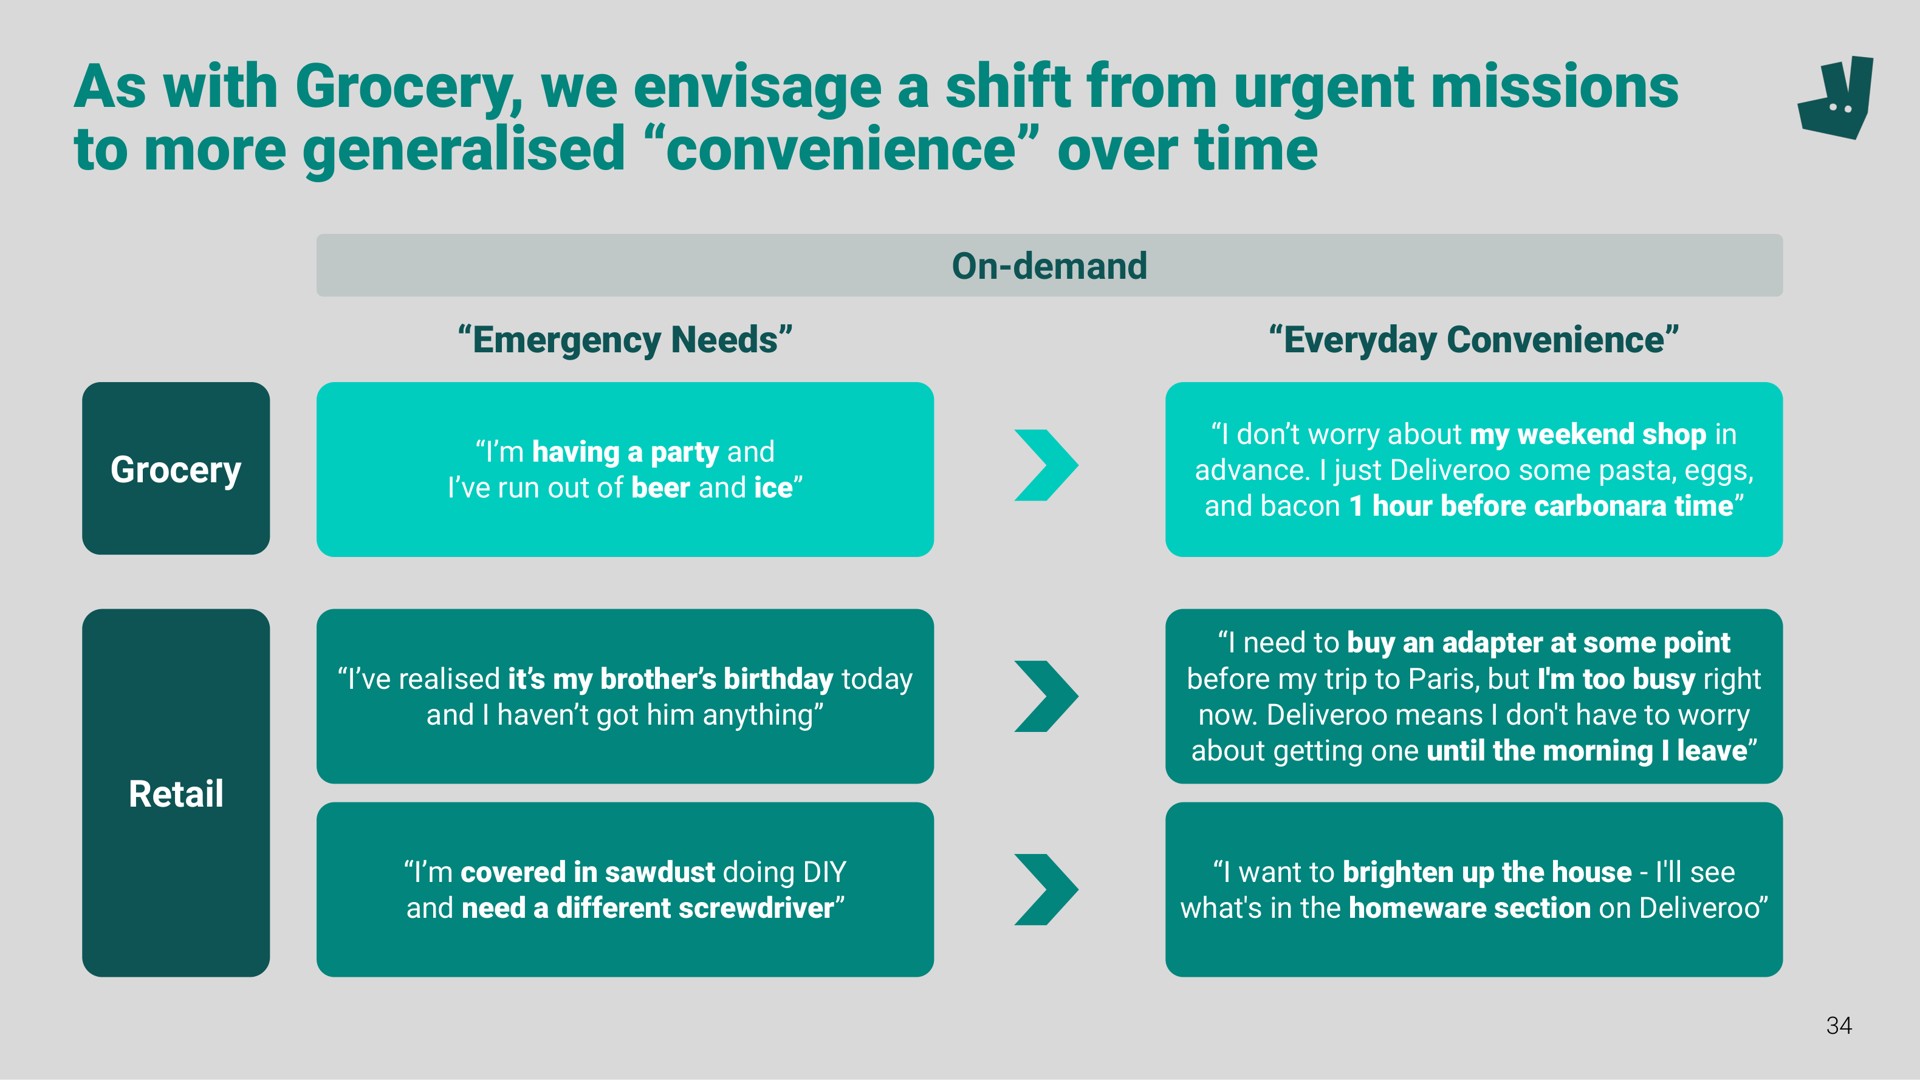 as with grocery we envisage a shift from urgent missions to more convenience over time | Deliveroo